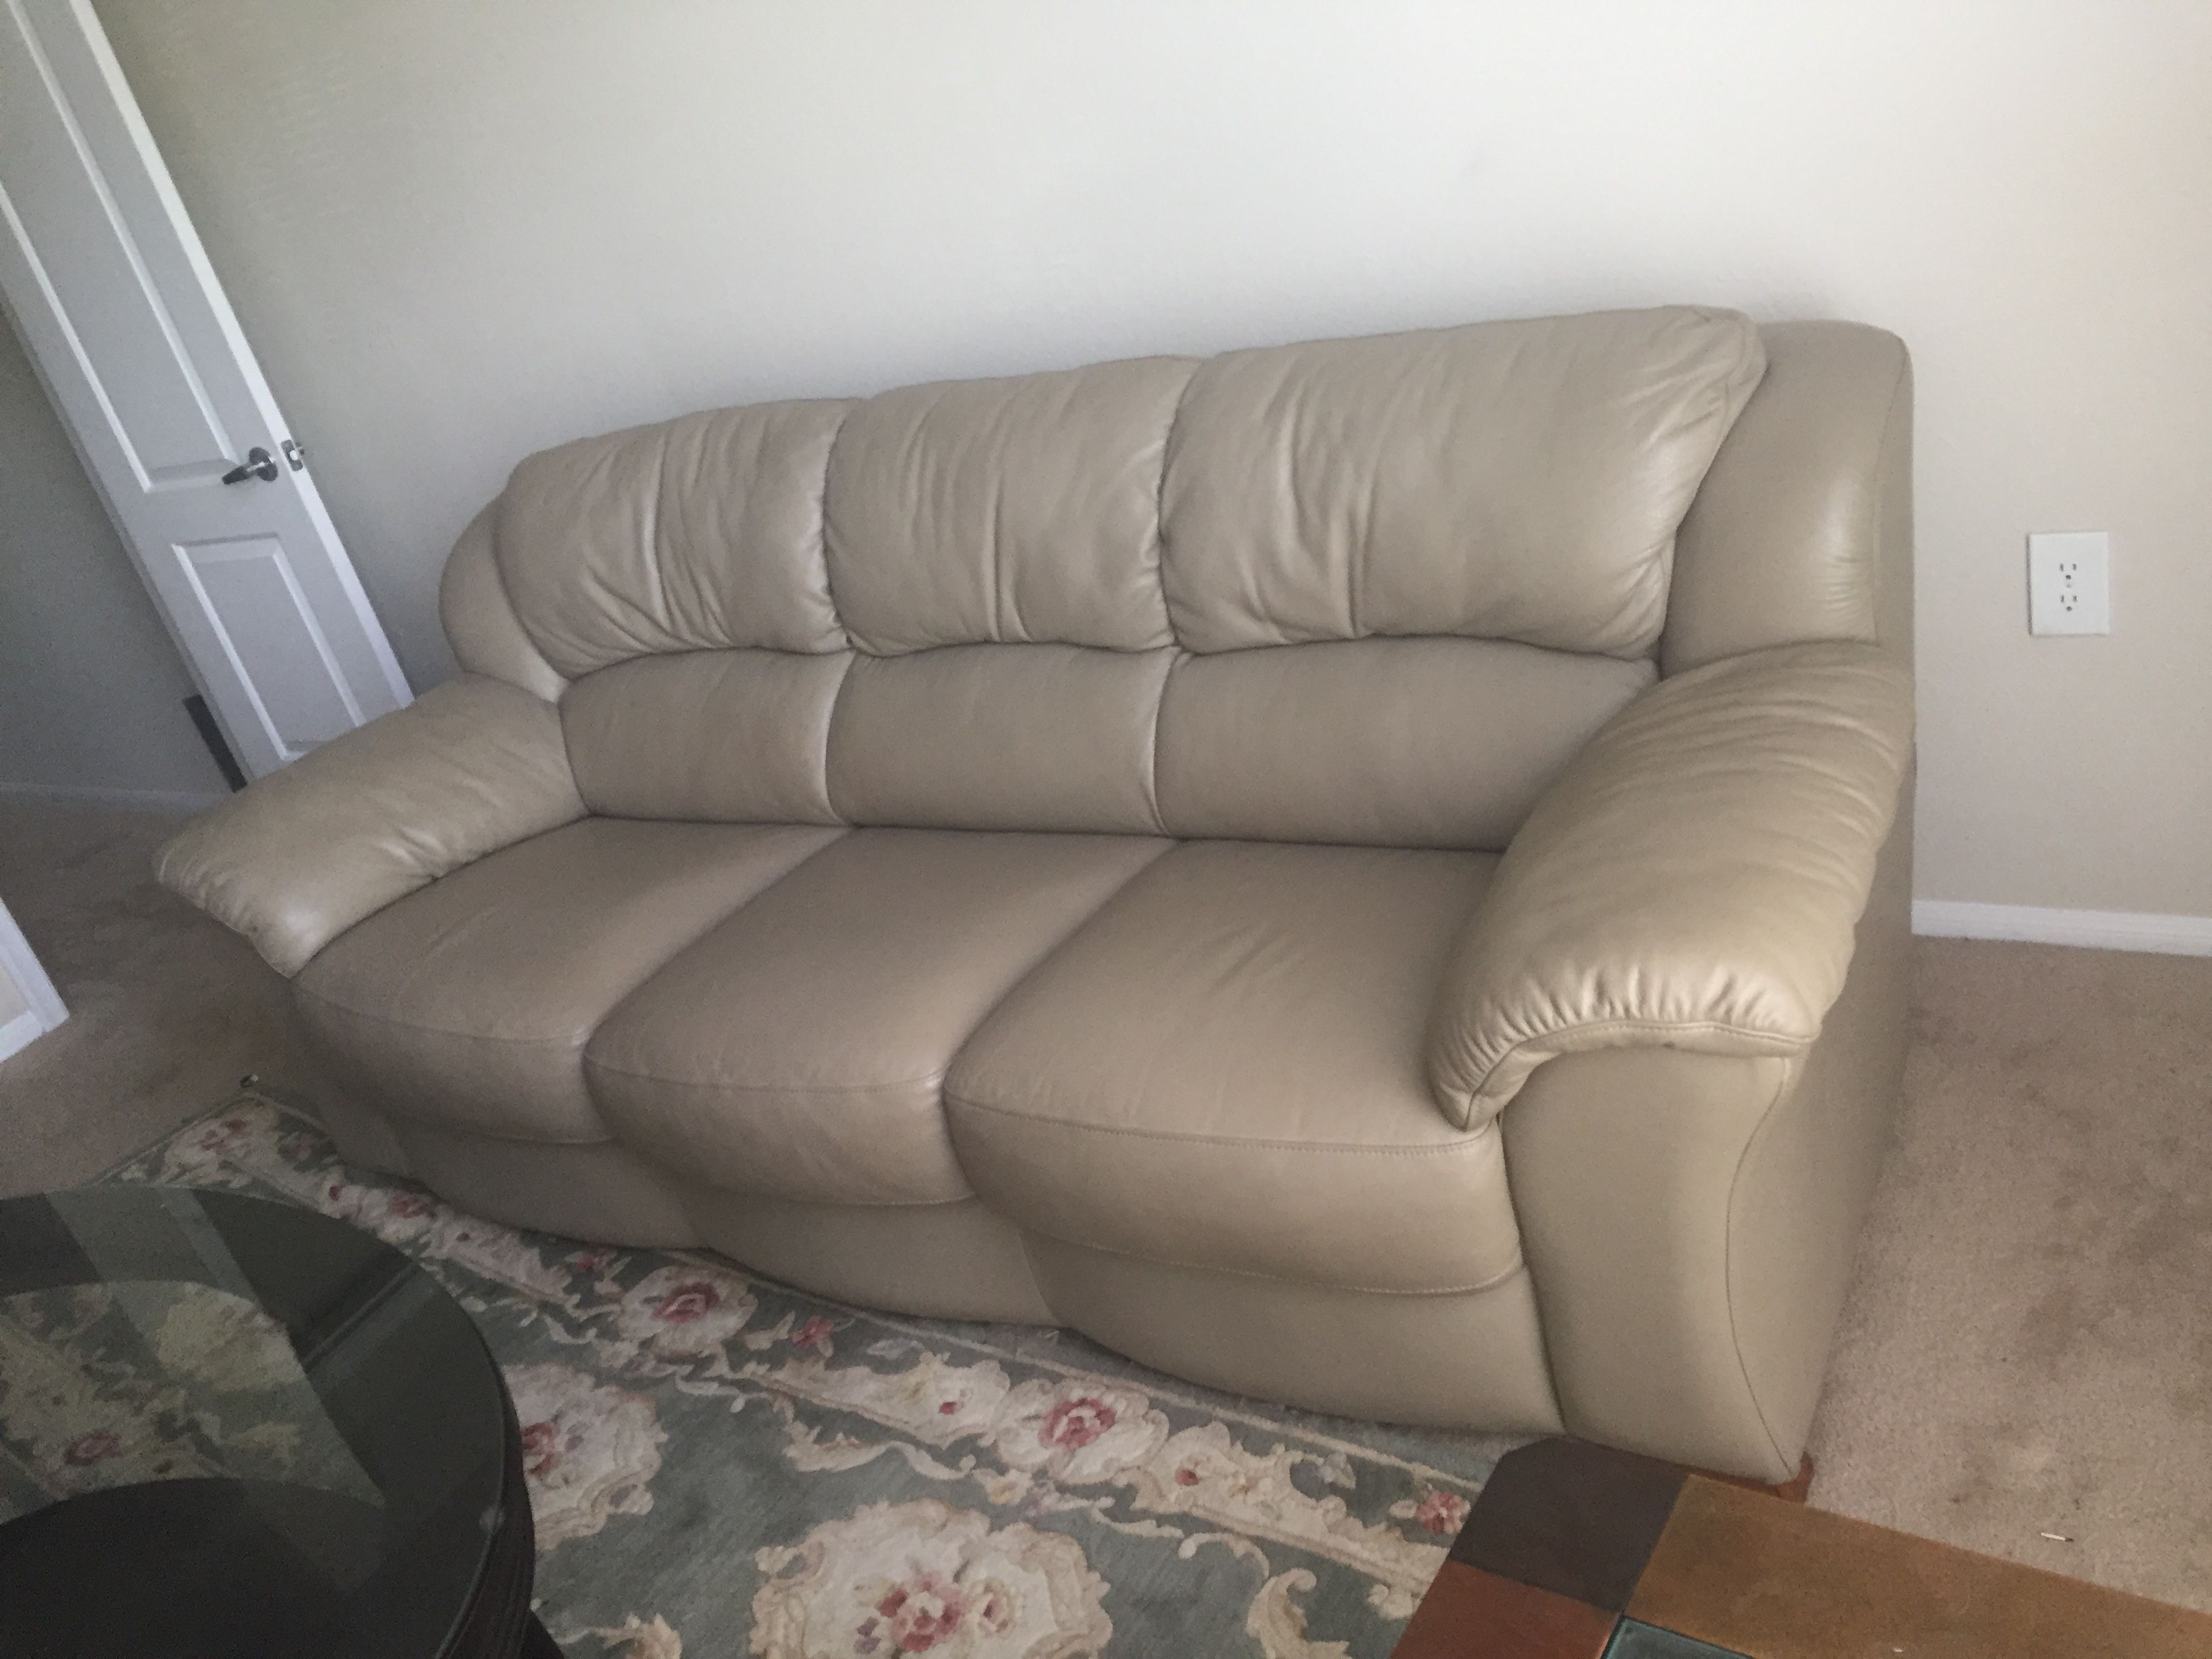 Lazboy leather sofa creme beige in great condition